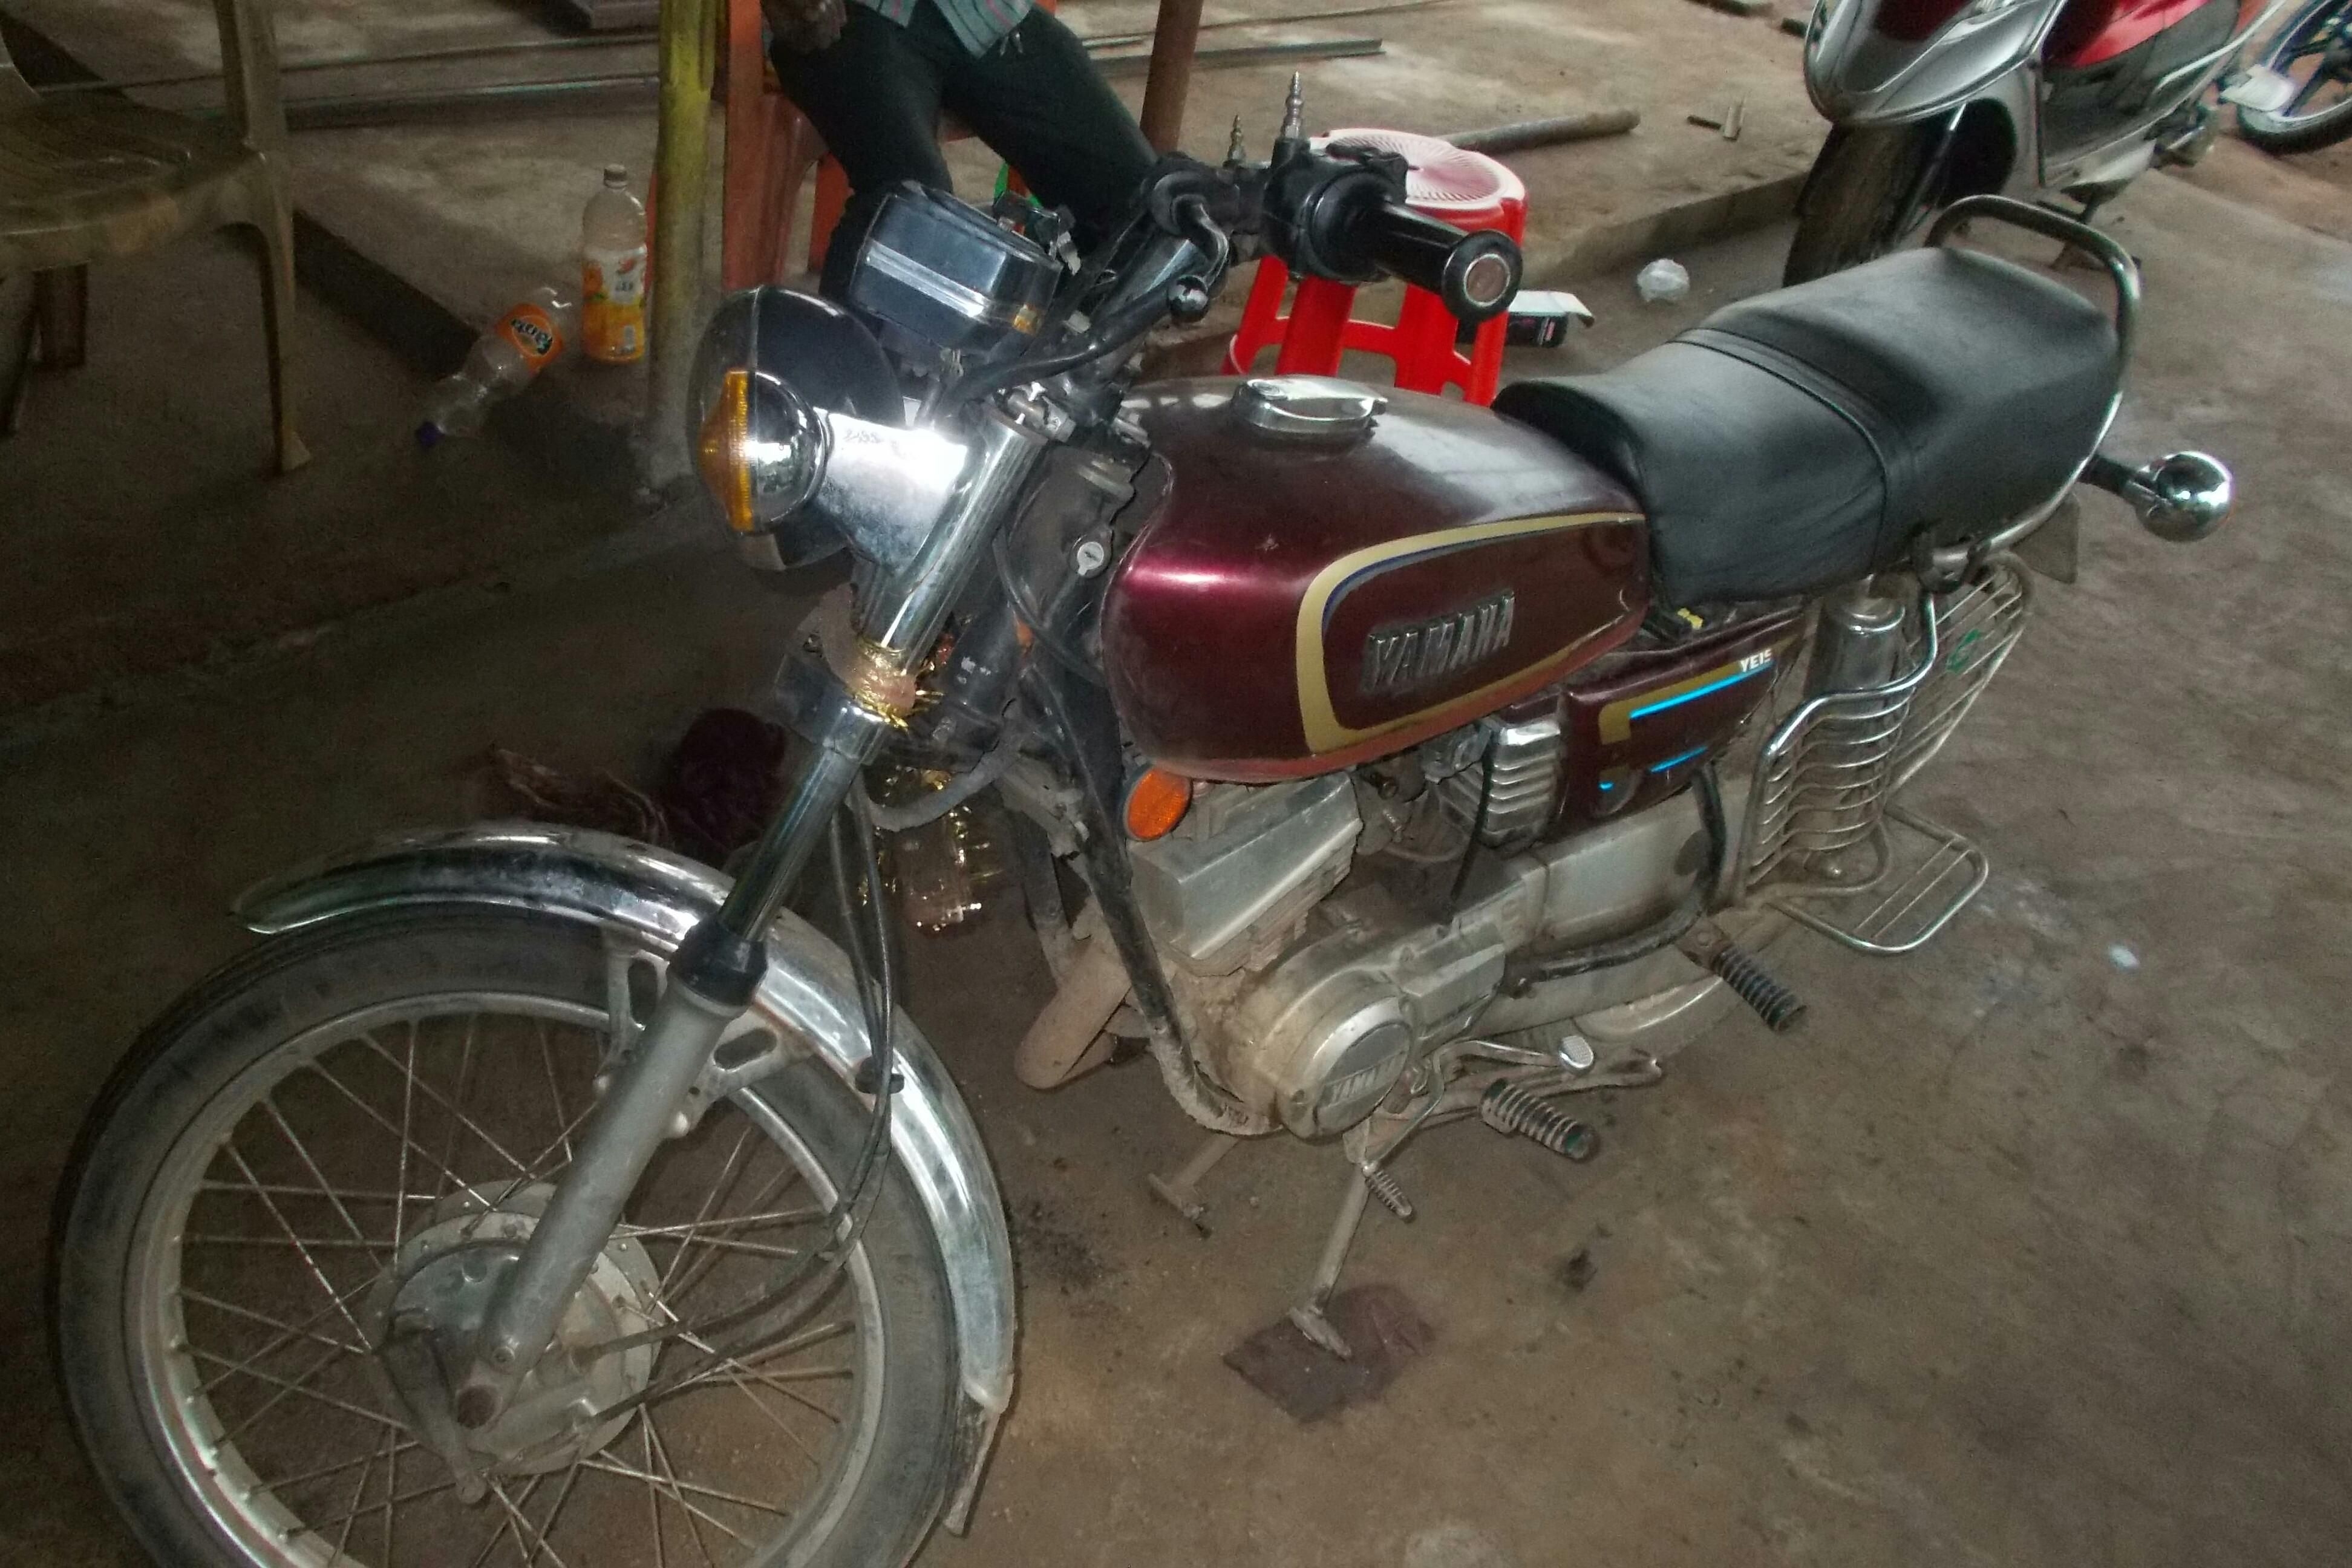 Yamaha Rx 100 Bike For Sale In Cuttack Id 1415217915 Droom